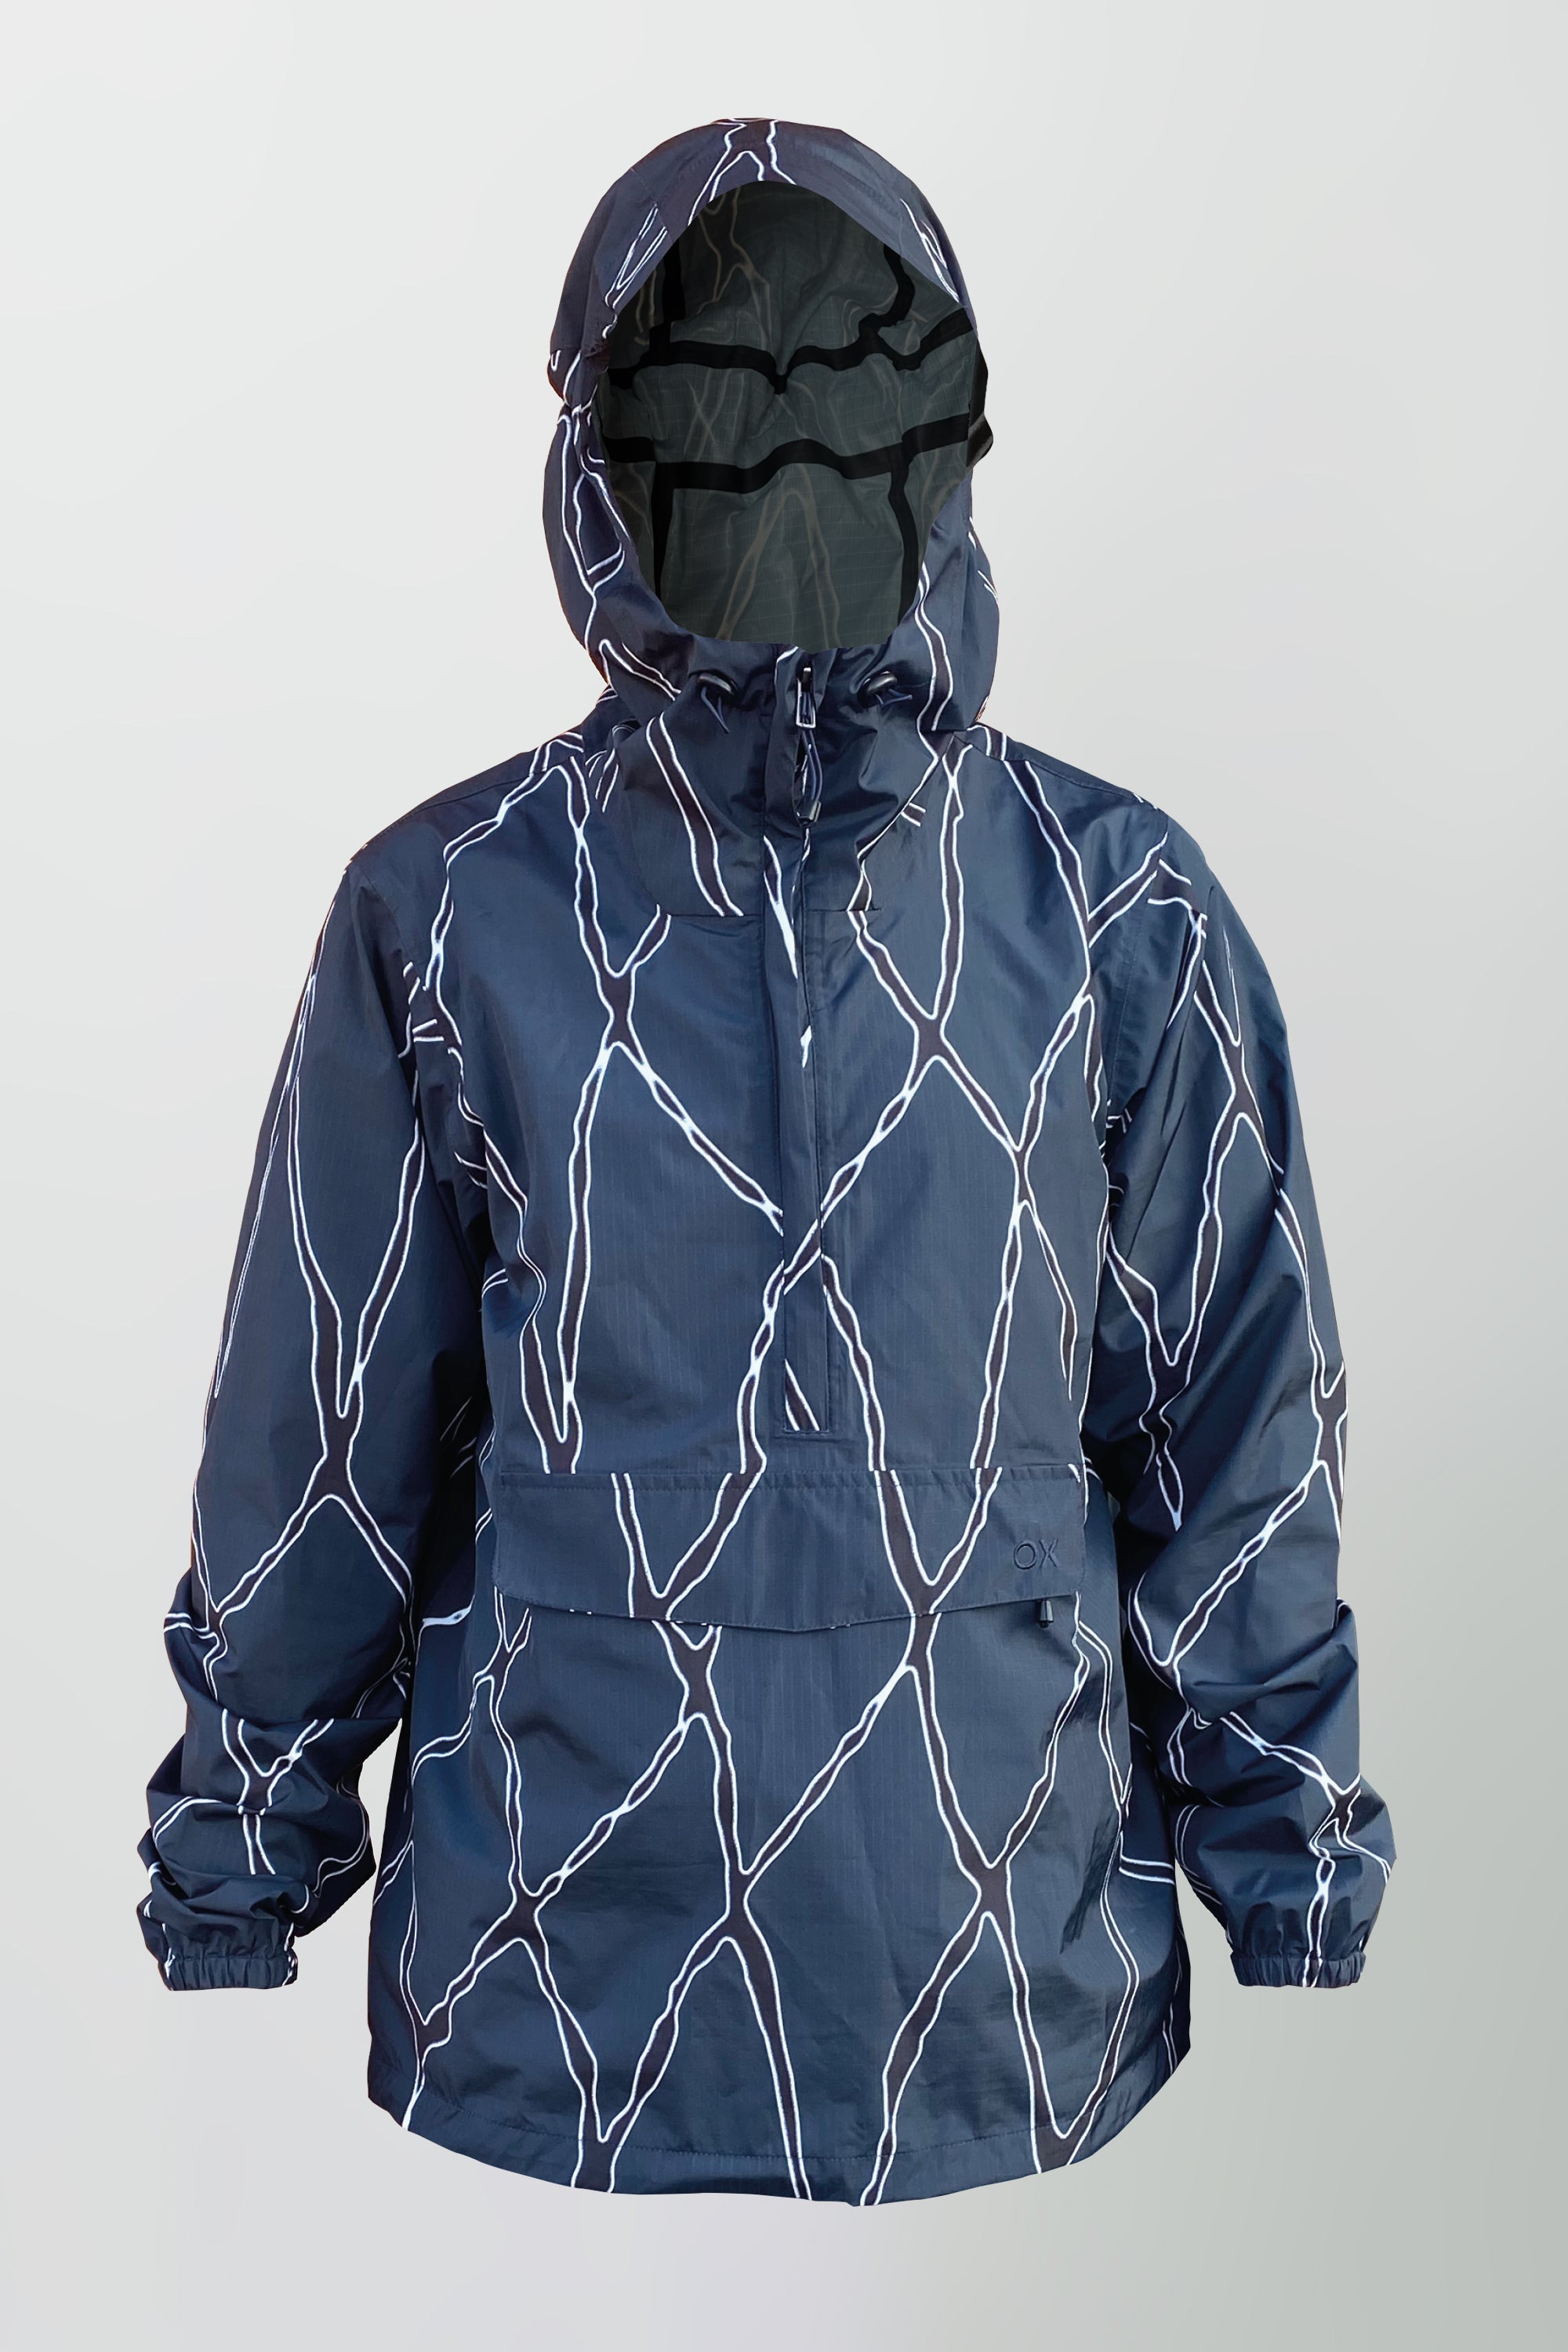 OXLEY PRINTED SHELL JACKET